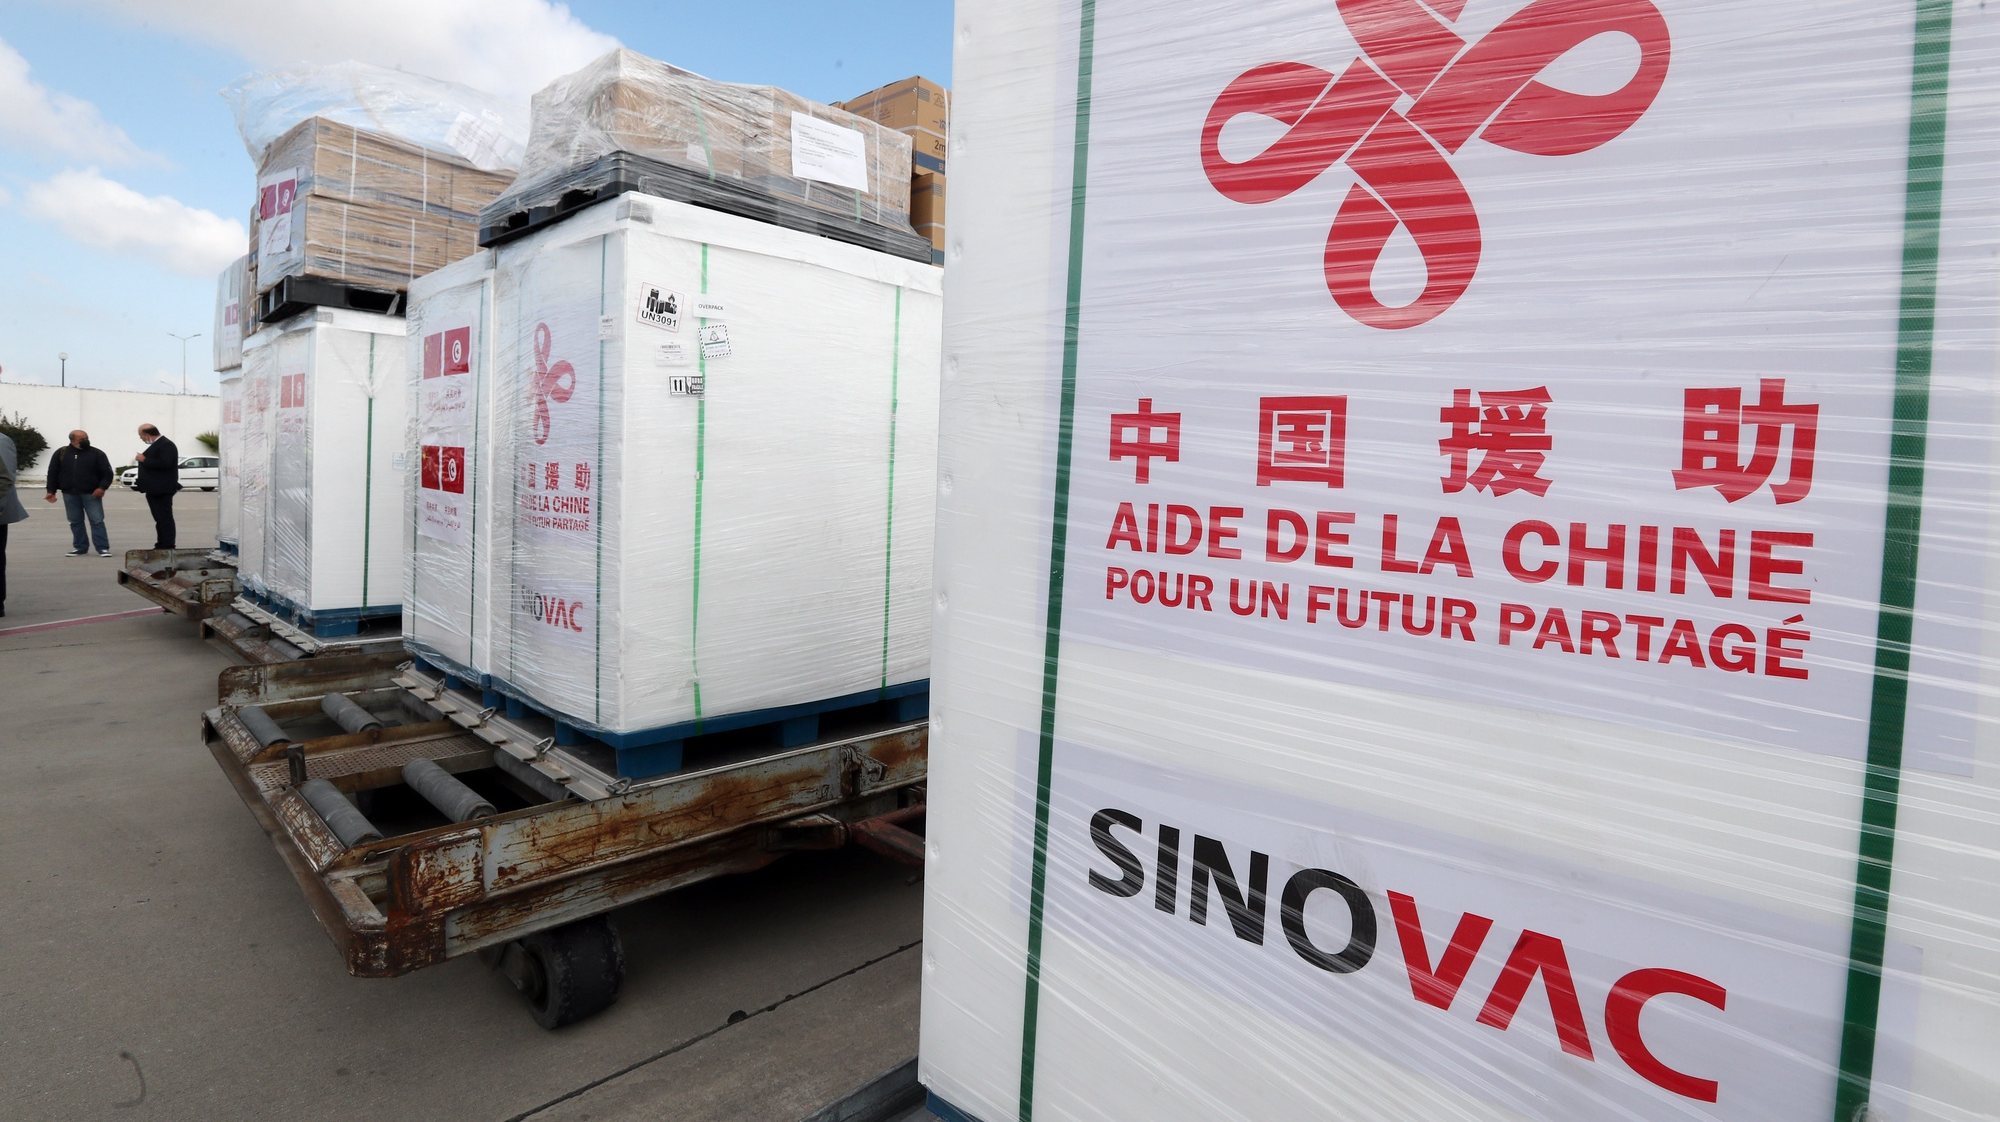 epa09095937 A vehicle is loaded with Sinovac COVID-19 vaccines upon their arrival at Tunis-Carthage airport in Tunis, Tunisia, 25 March 2021. The Minister of Health, Faouzi Mahdi stated the reception of a Chinese donation of 200,000 doses of the Sinovac COVID-19 aboard a Tunisian military plane is the third vaccine against COVID-19 that Tunisia has received.  EPA/MOHAMED MESSARA